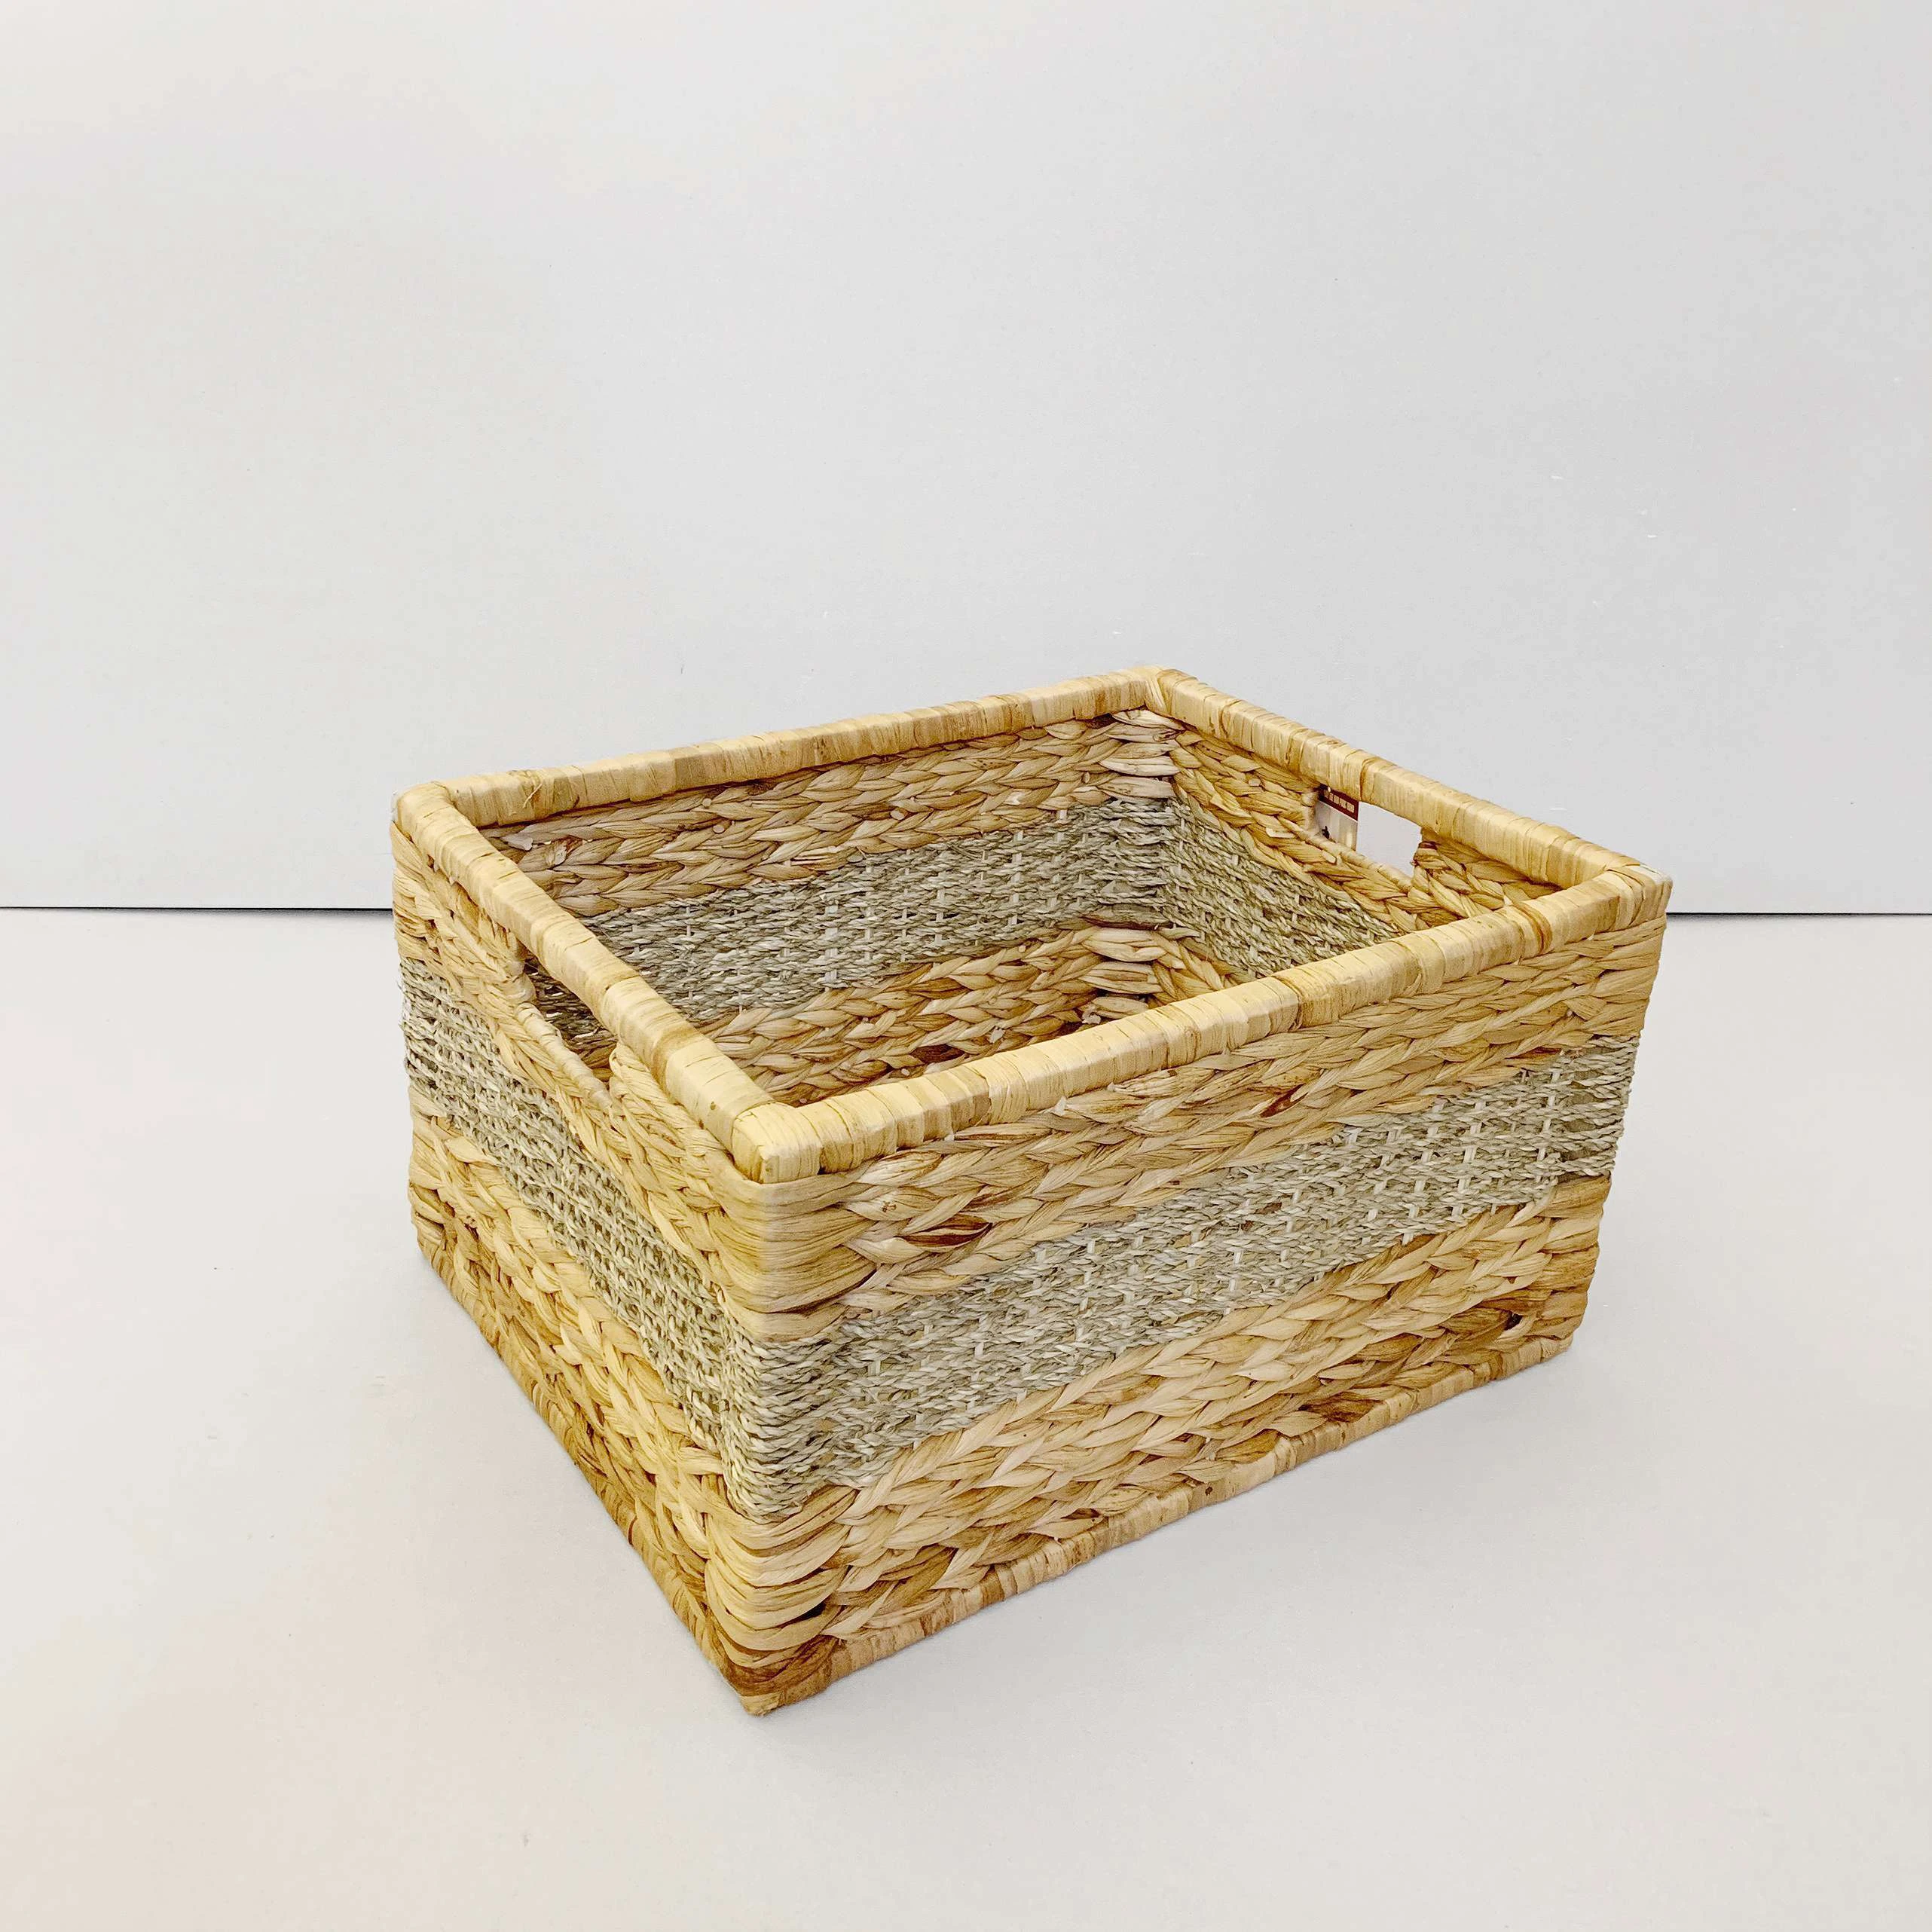 Vietnam High quality Eco - friendly Customized Handwoven Water Hyacinth Laundry Basket Storage Basket with cut out handles